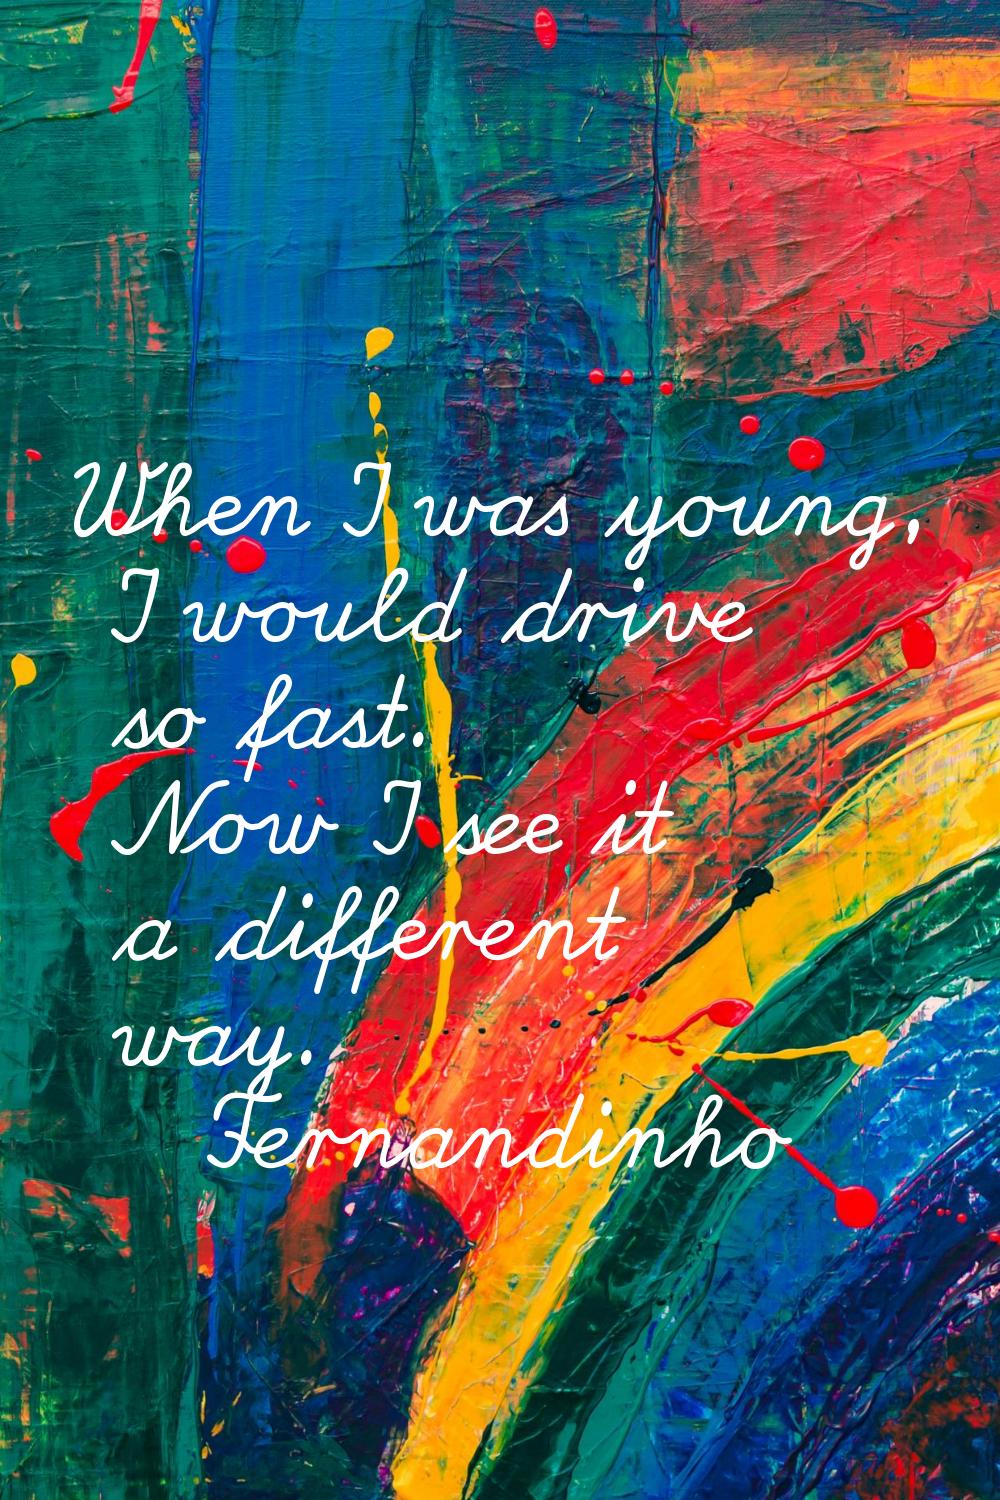 When I was young, I would drive so fast. Now I see it a different way.